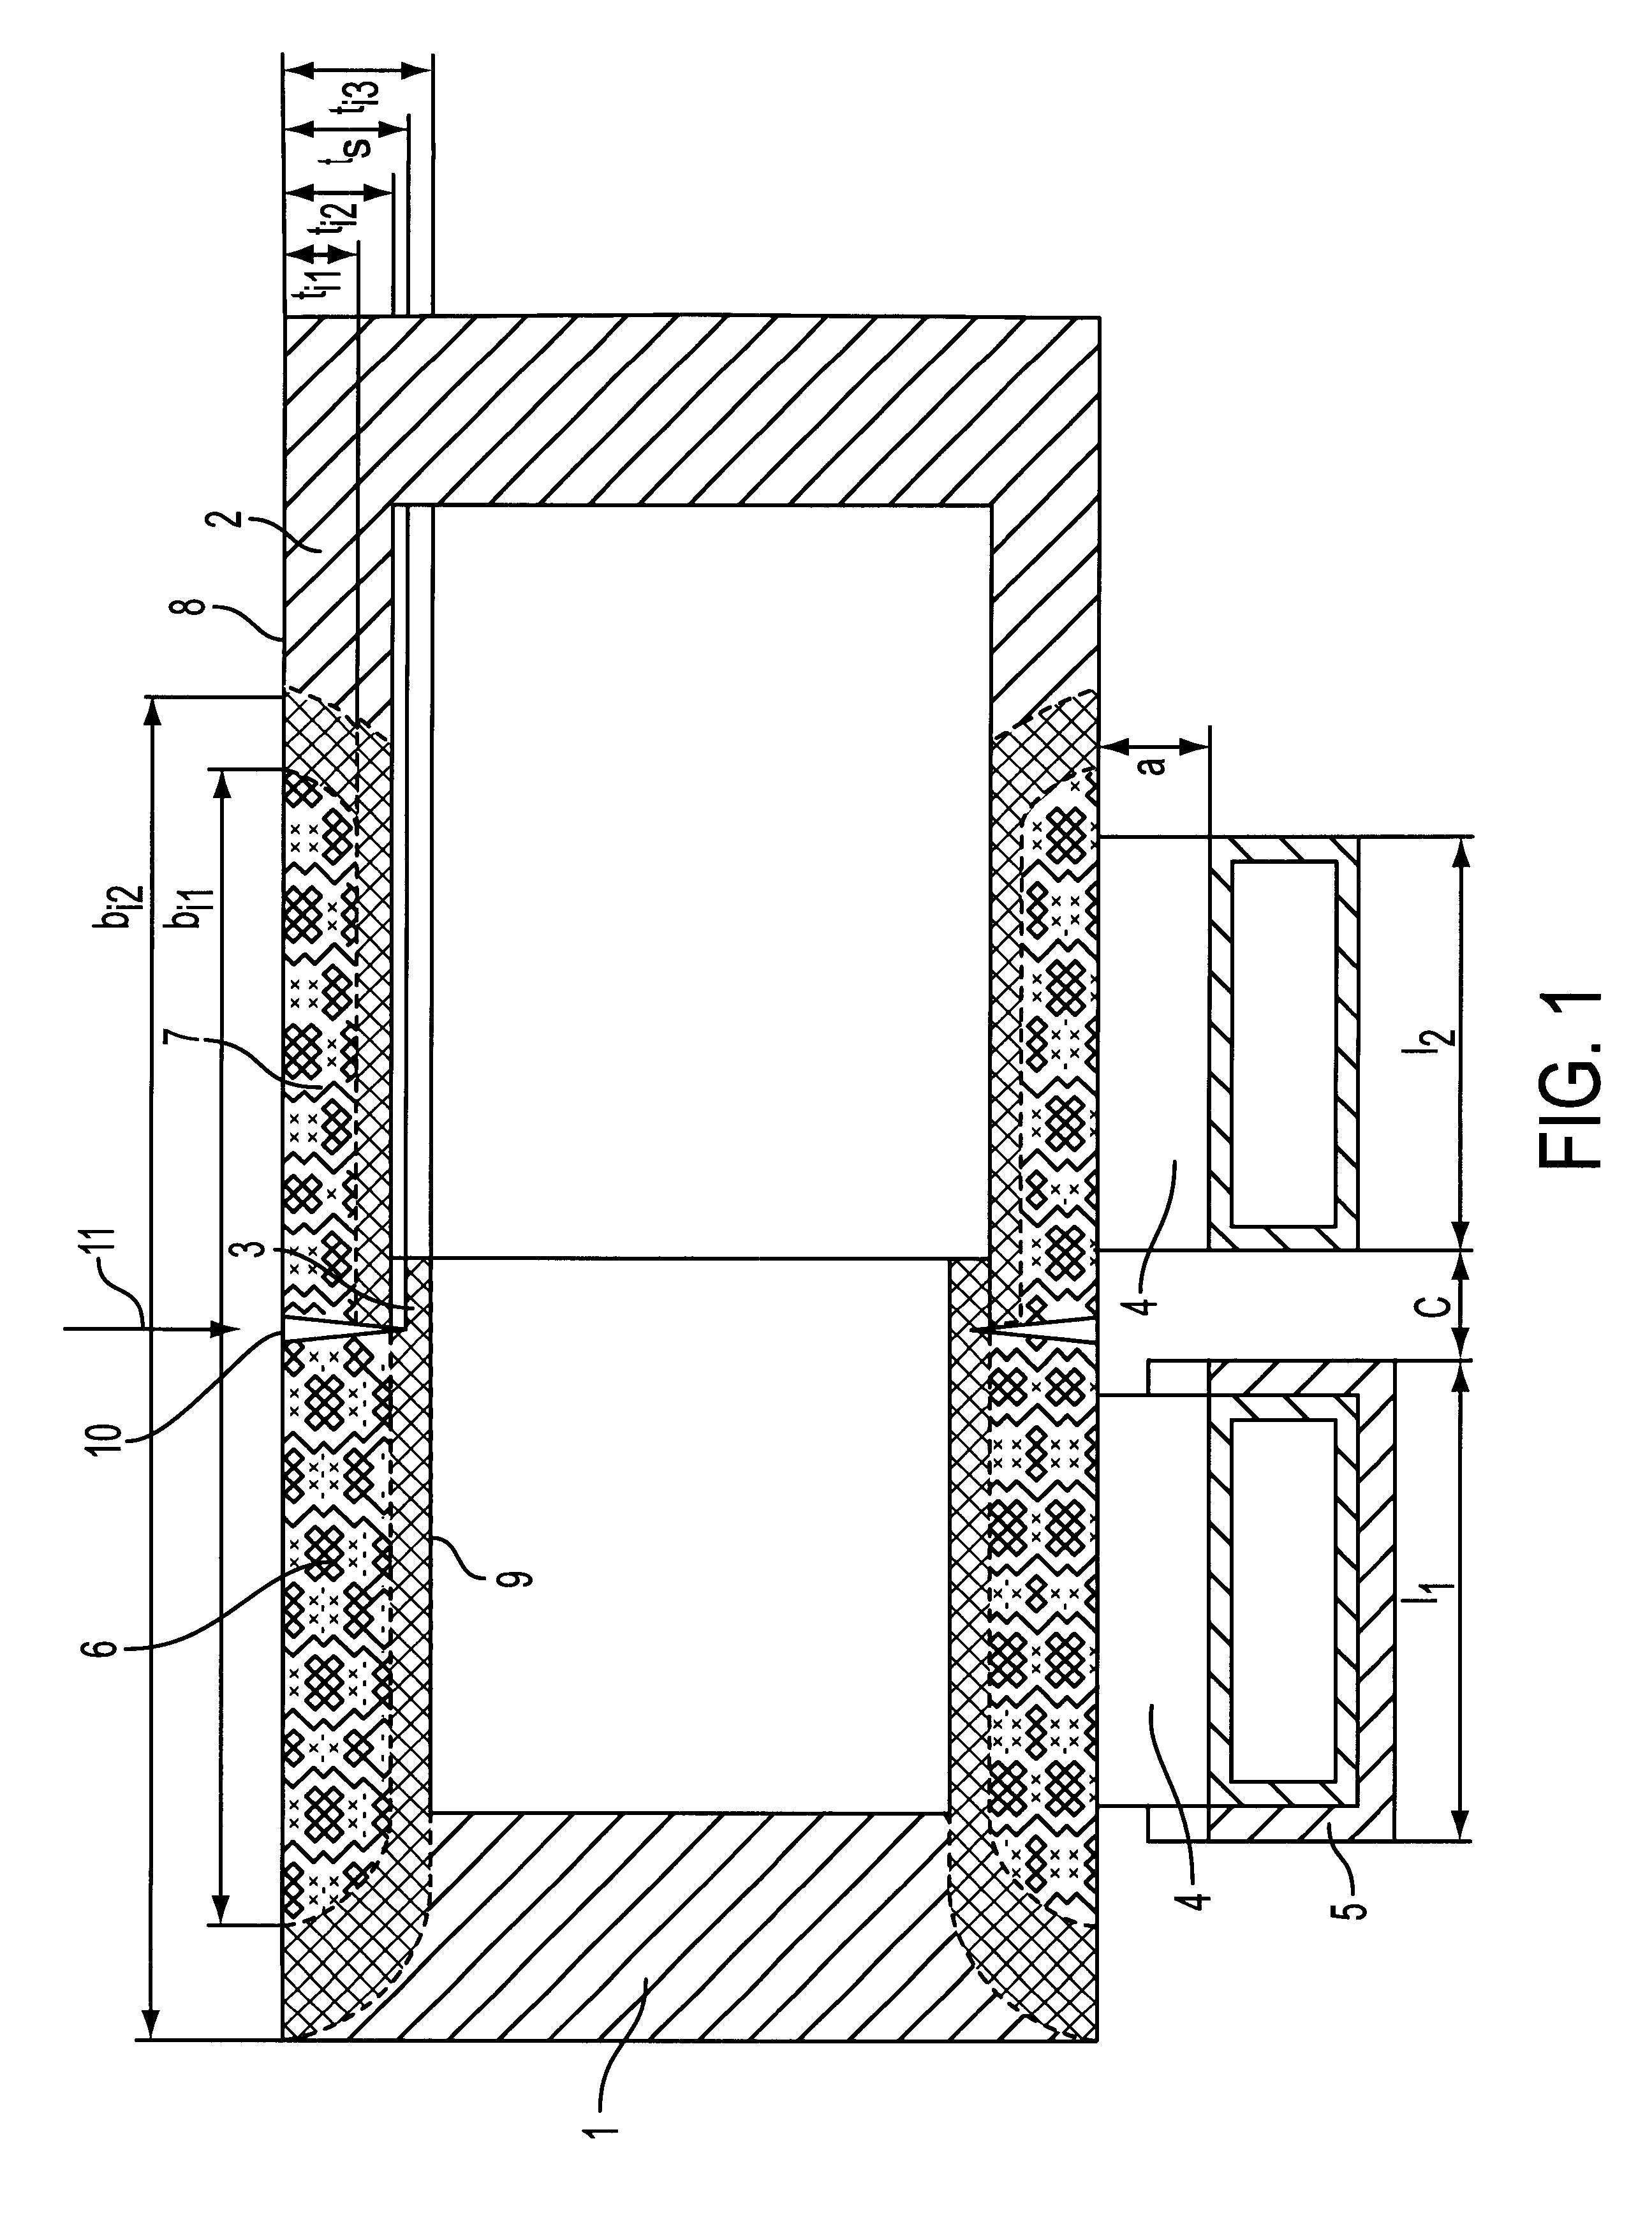 Method for beam welding of hardenable steels by means of short-time heat treatment